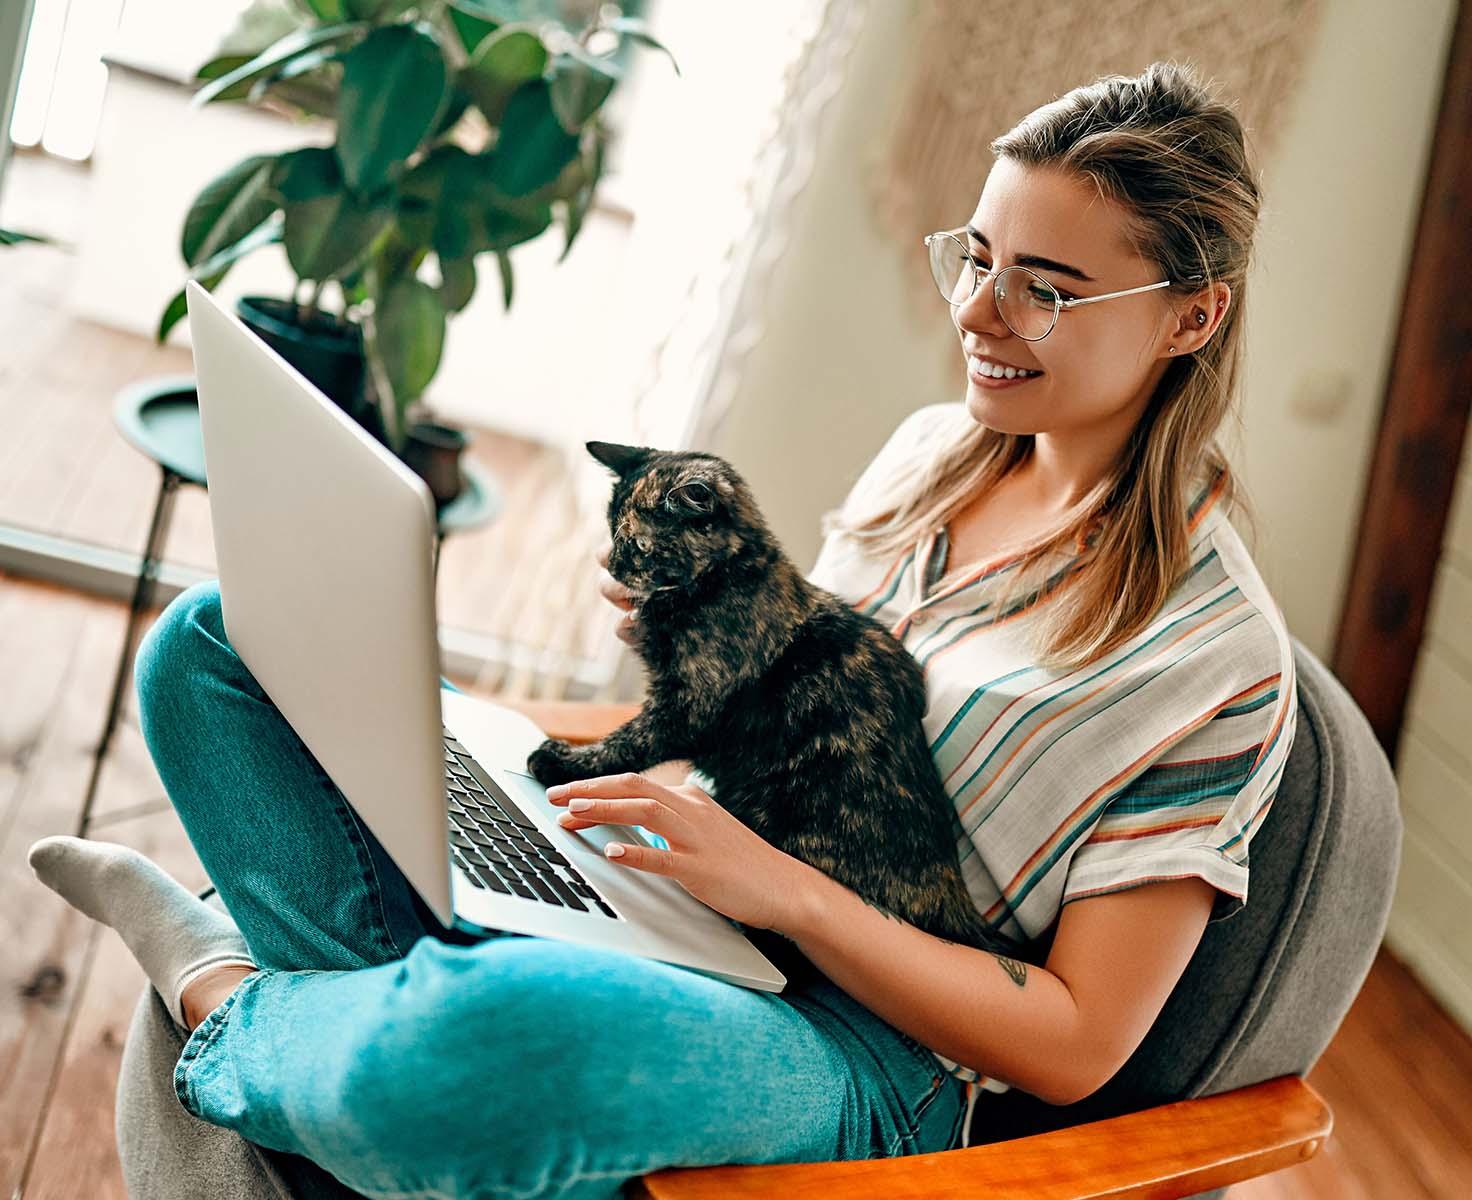 A woman with glasses smiles while working on a laptop with her cat